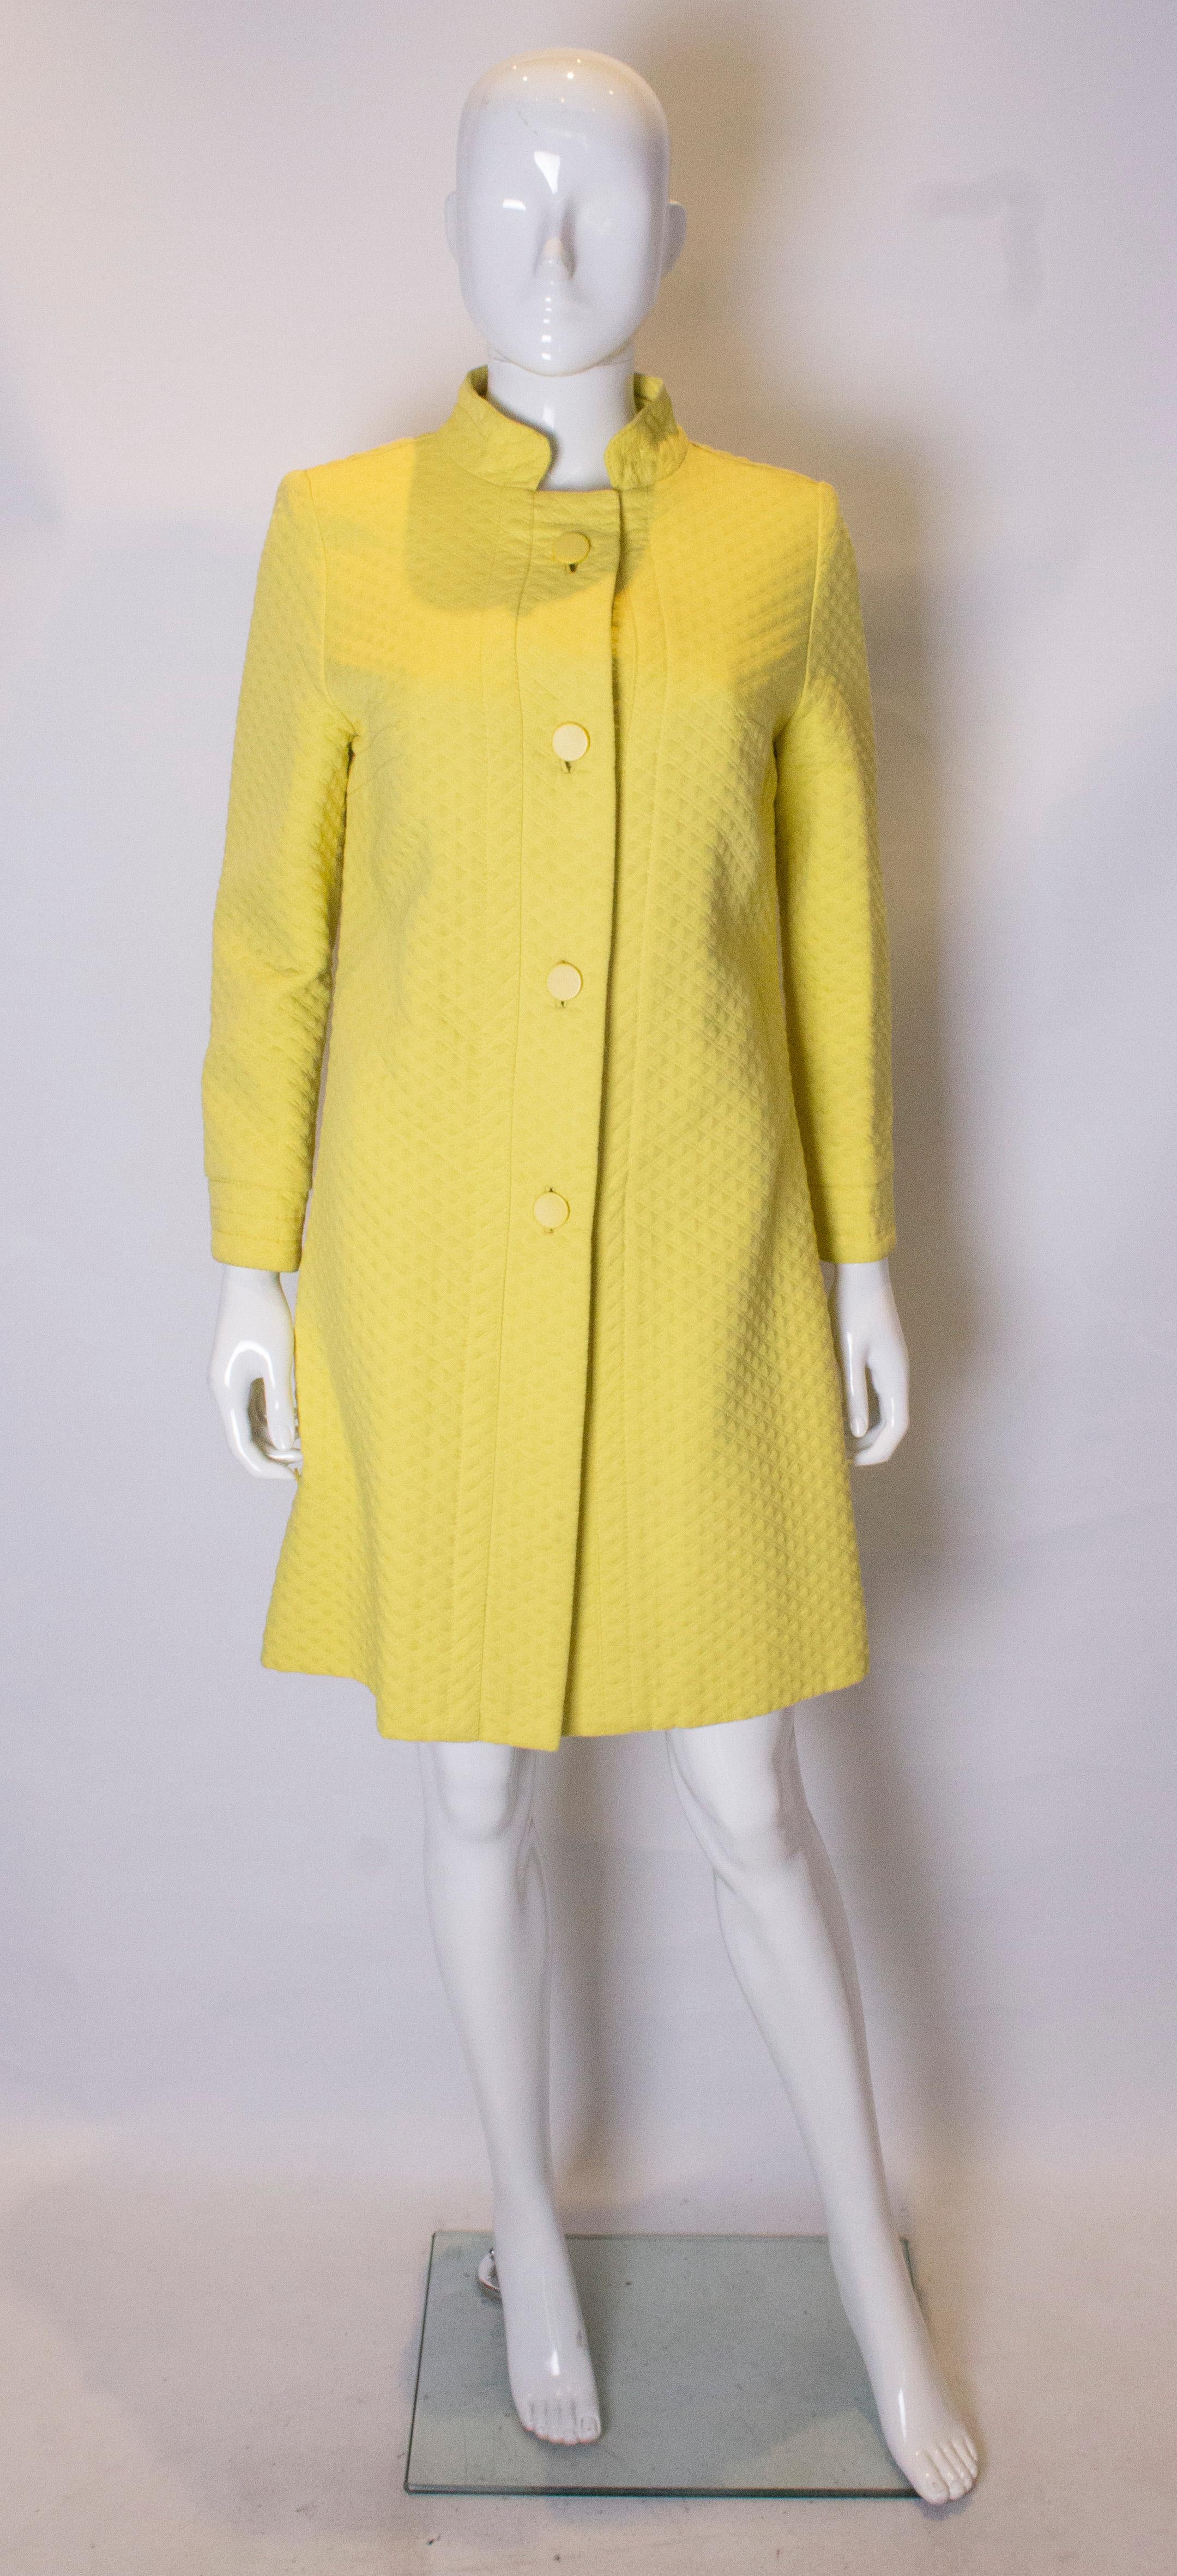 A headturning  chic vintage yellow coat. This quilted yellow coat has a mandarin collar with buttons detail on the cuffs ,and a button opening at the front. it has stitch detail on the shoulders and bust line.